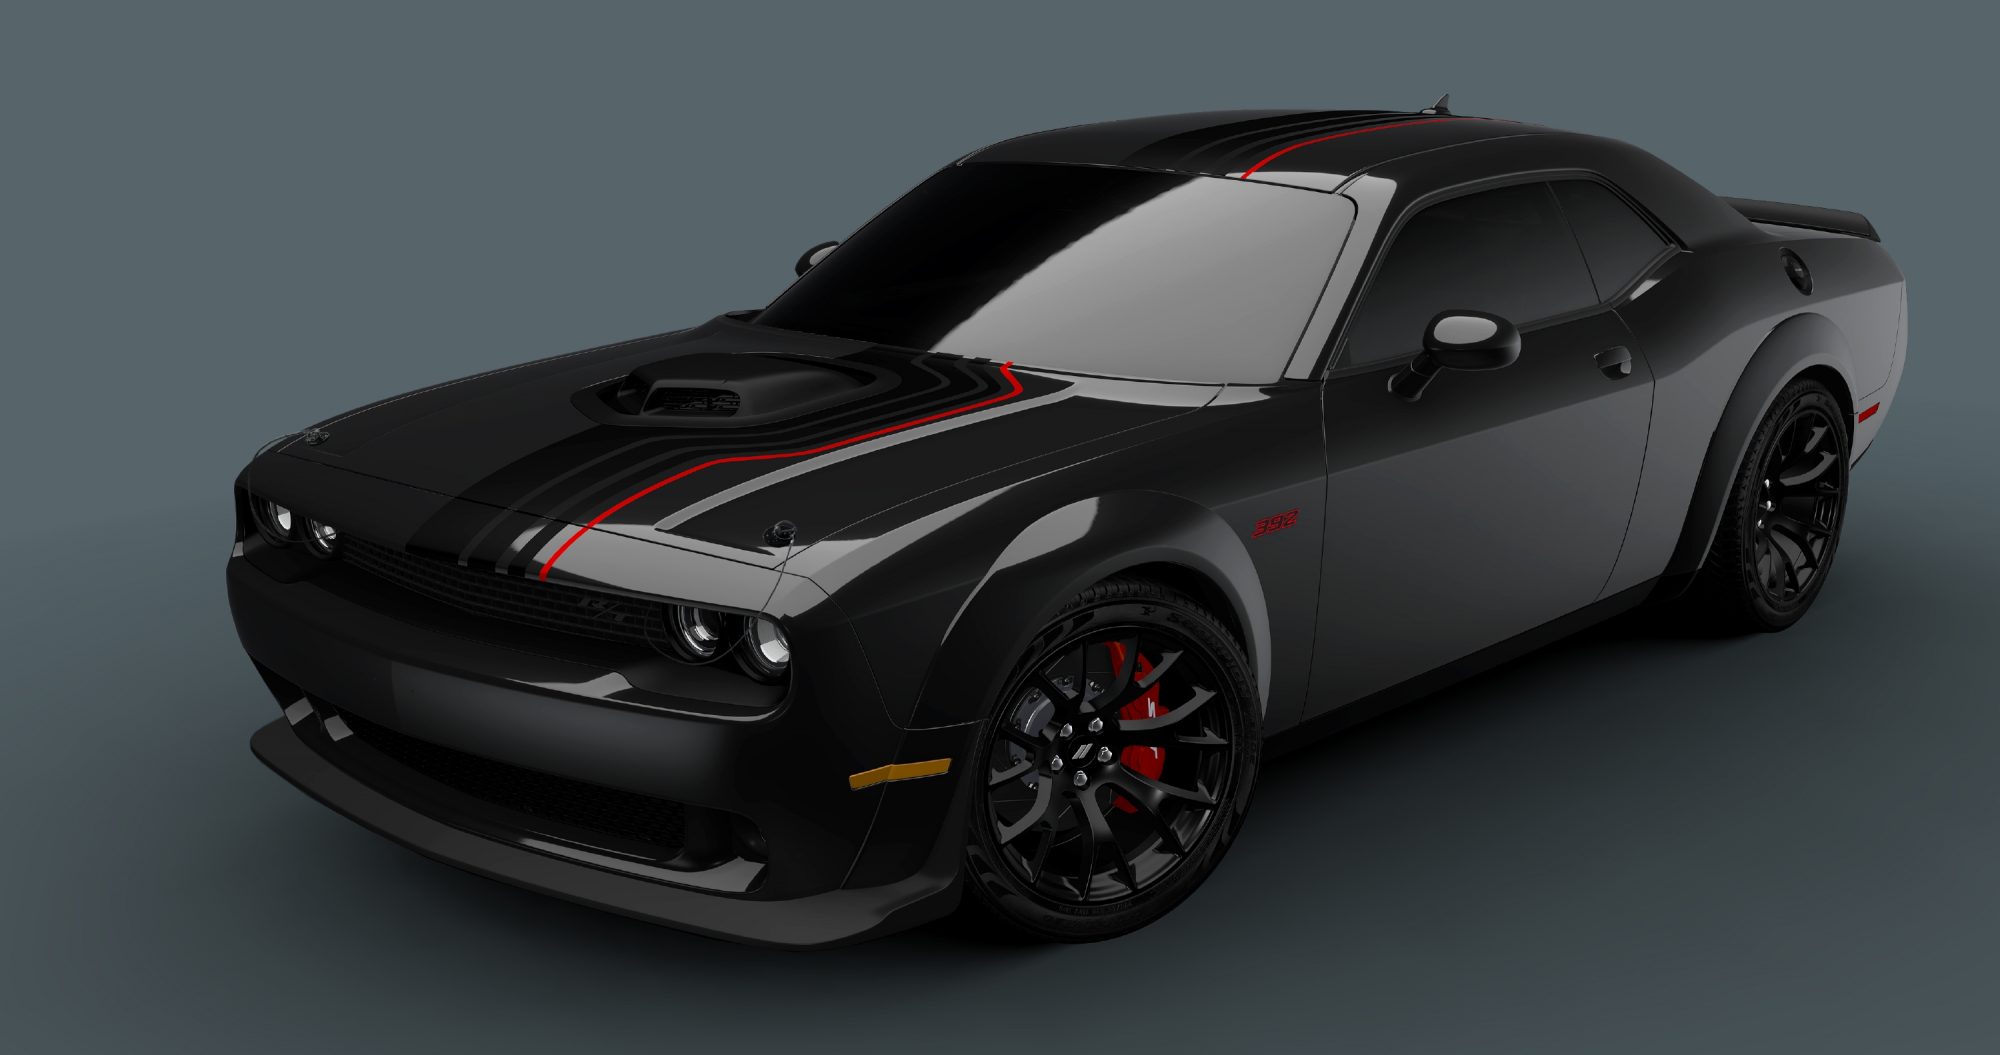 What are the engine options of the 2022 Dodge Challenger?